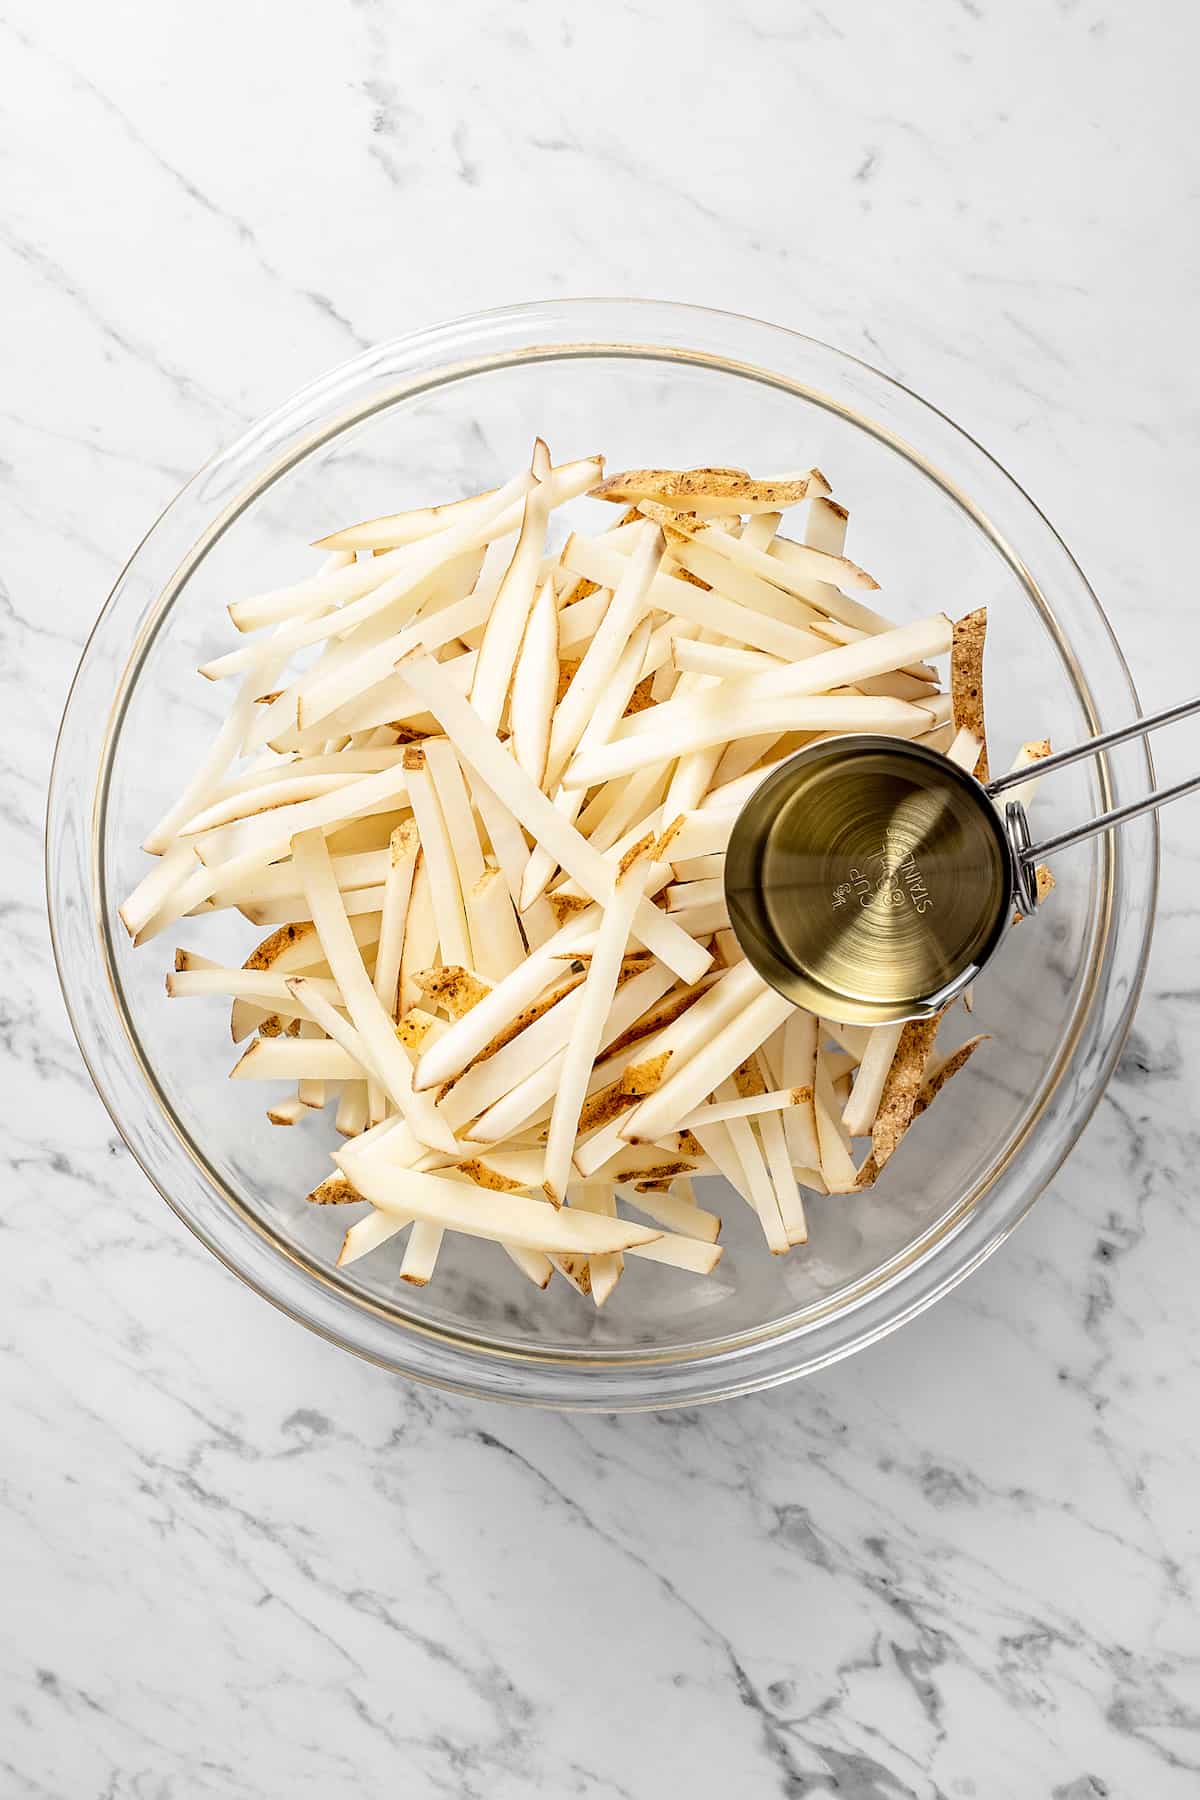 Overhead view of uncooked fries in mixing bowl with oil